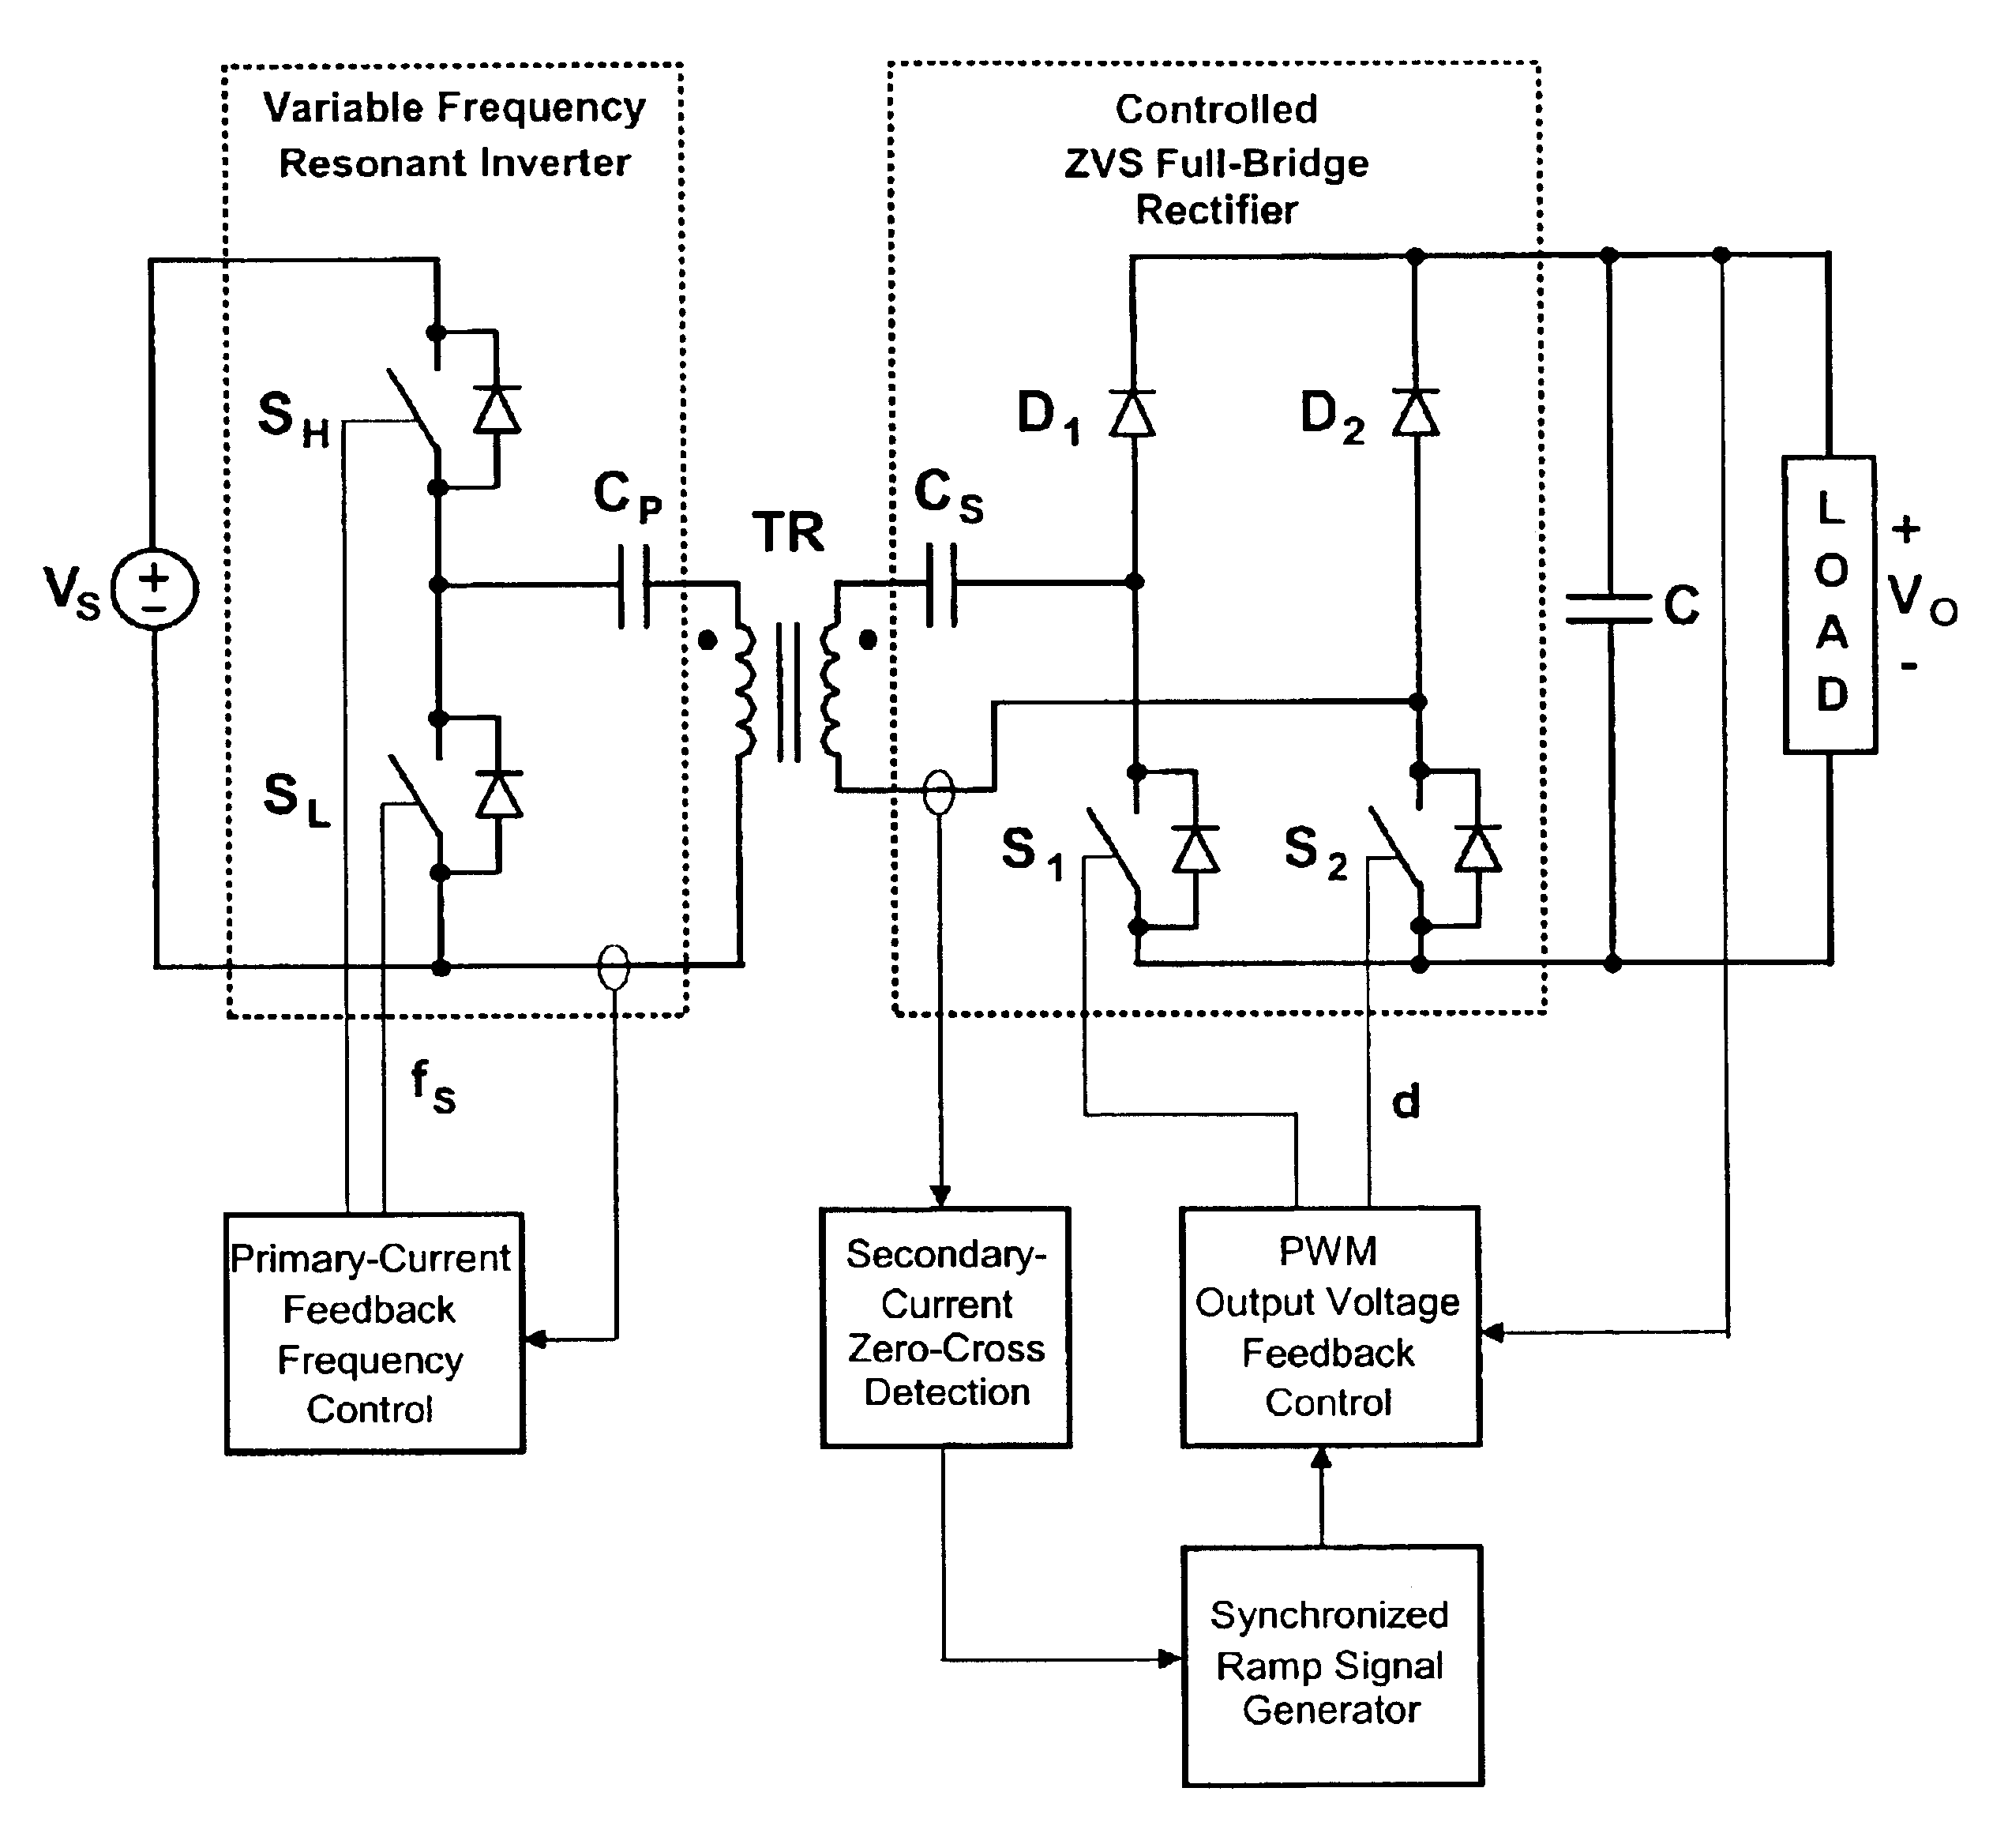 Contactless electrical energy transmission system having a primary side current feedback control and soft-switched secondary side rectifier